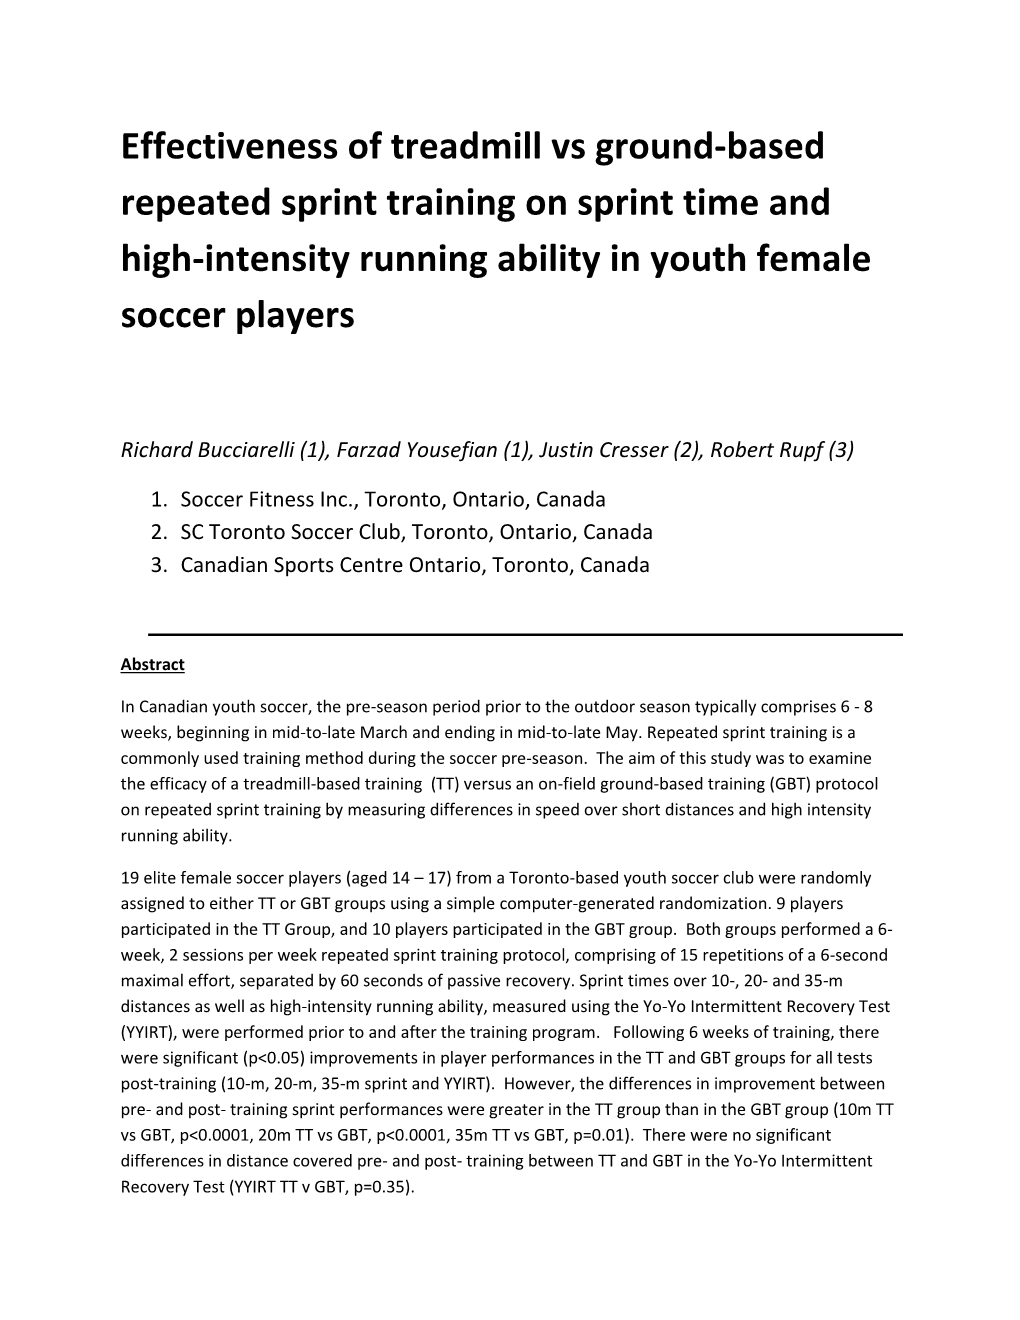 Effectiveness of Treadmill Vs Ground-Based Repeated Sprint Training on Sprint Time and High-Intensity Running Ability in Youth Female Soccer Players